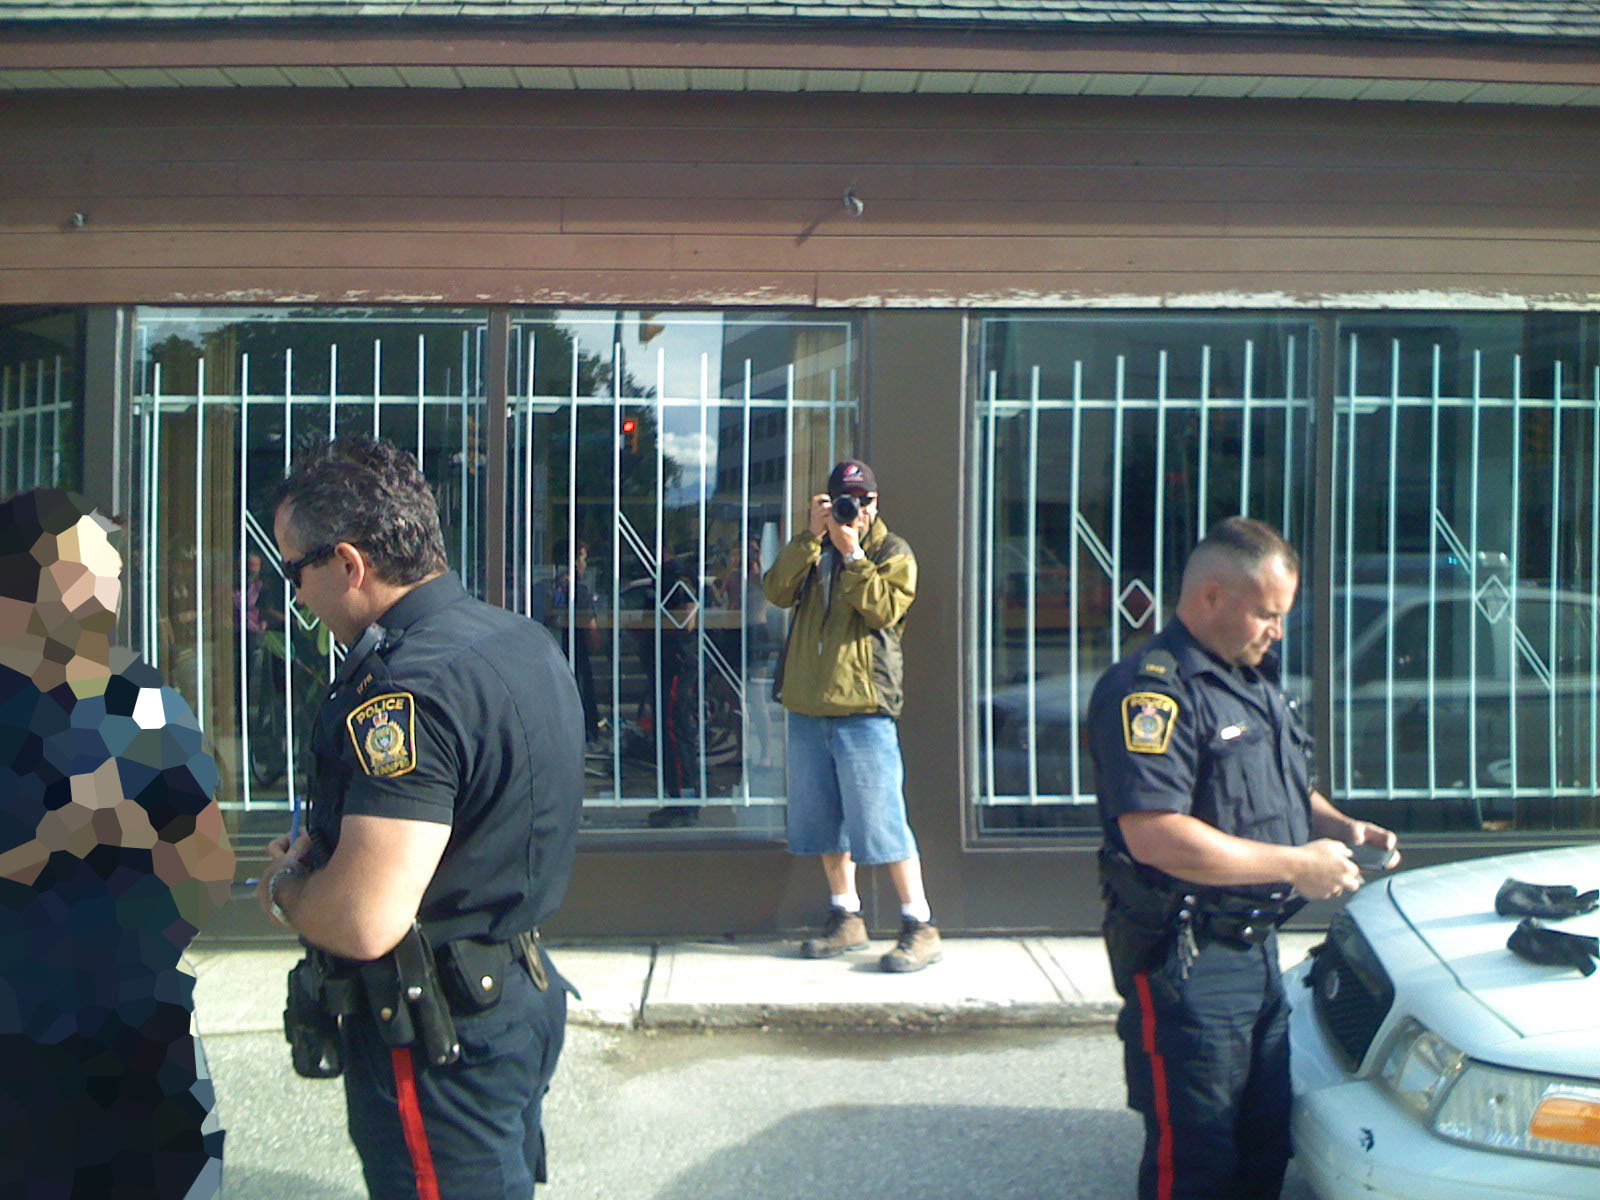 From left to right, a pixelated figure being interrogated by a police officer, a person facing the camera taking a photo, and an officer looking at something with gloves on a police car hood